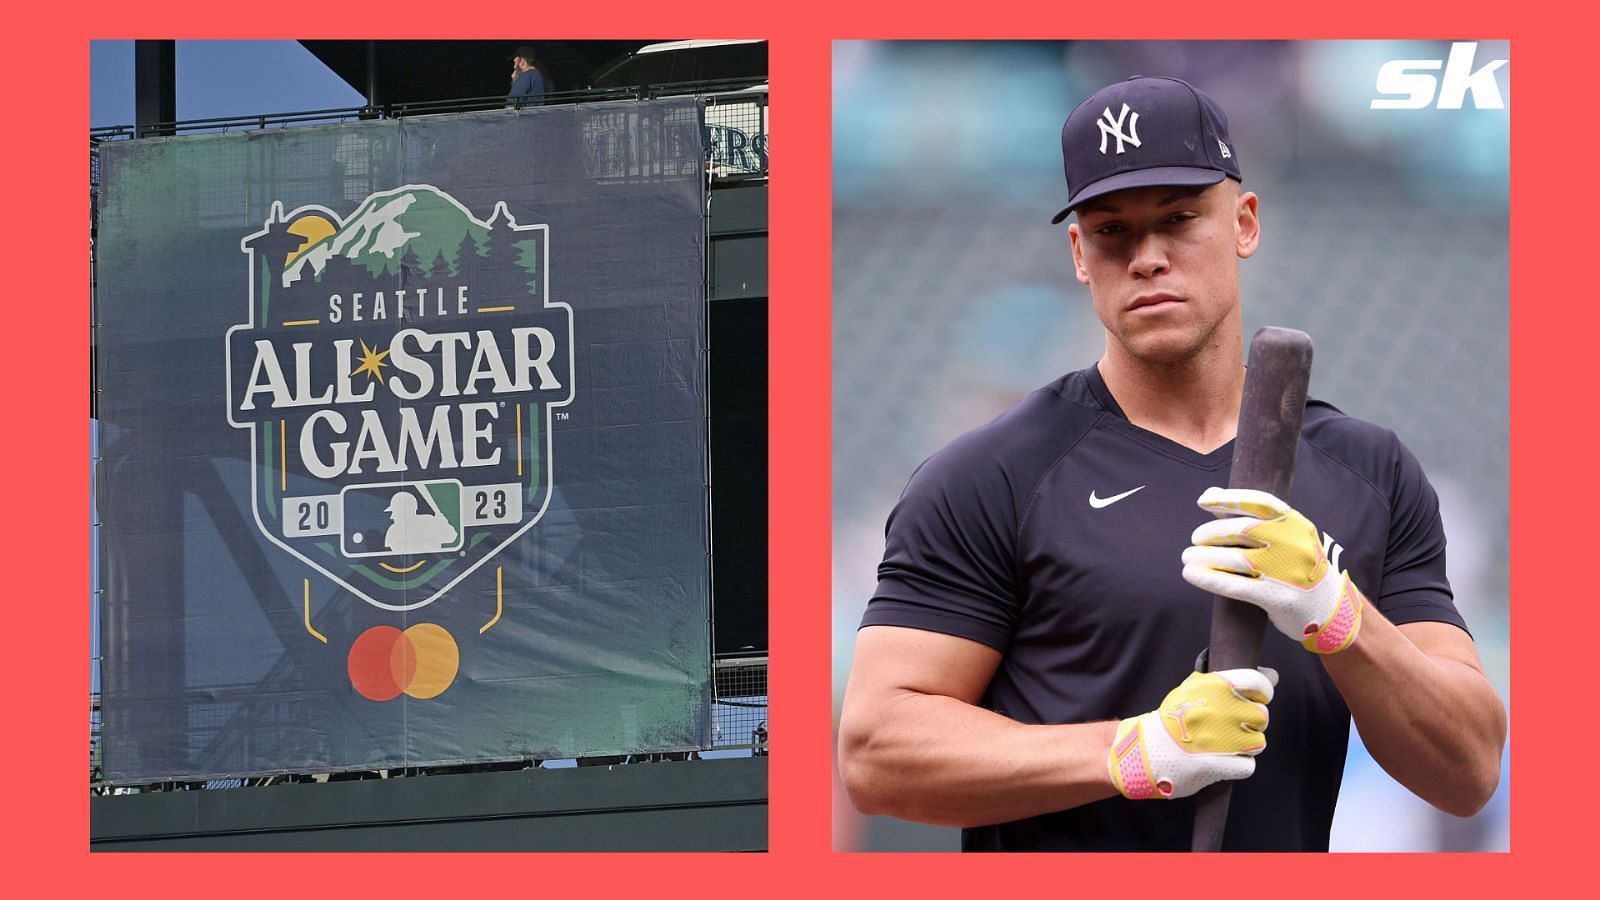 New York Yankees take news of Aaron Judge being only All-Star